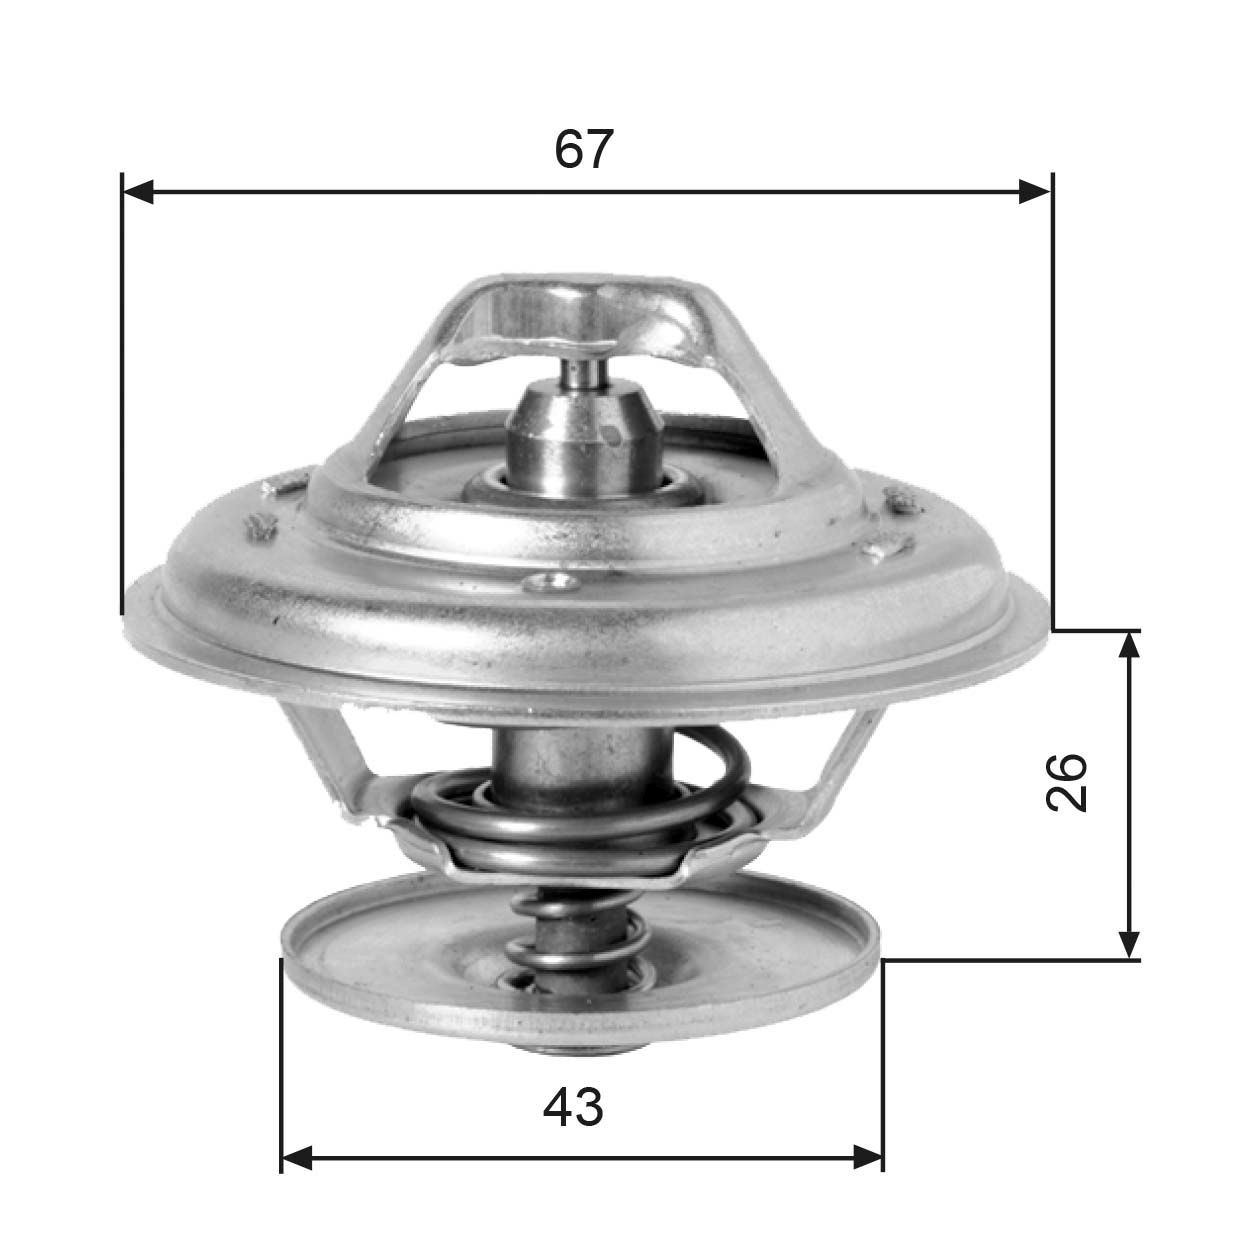 GATES TH01975G1 Engine thermostat Opening Temperature: 75°C, with gaskets/seals, without housing